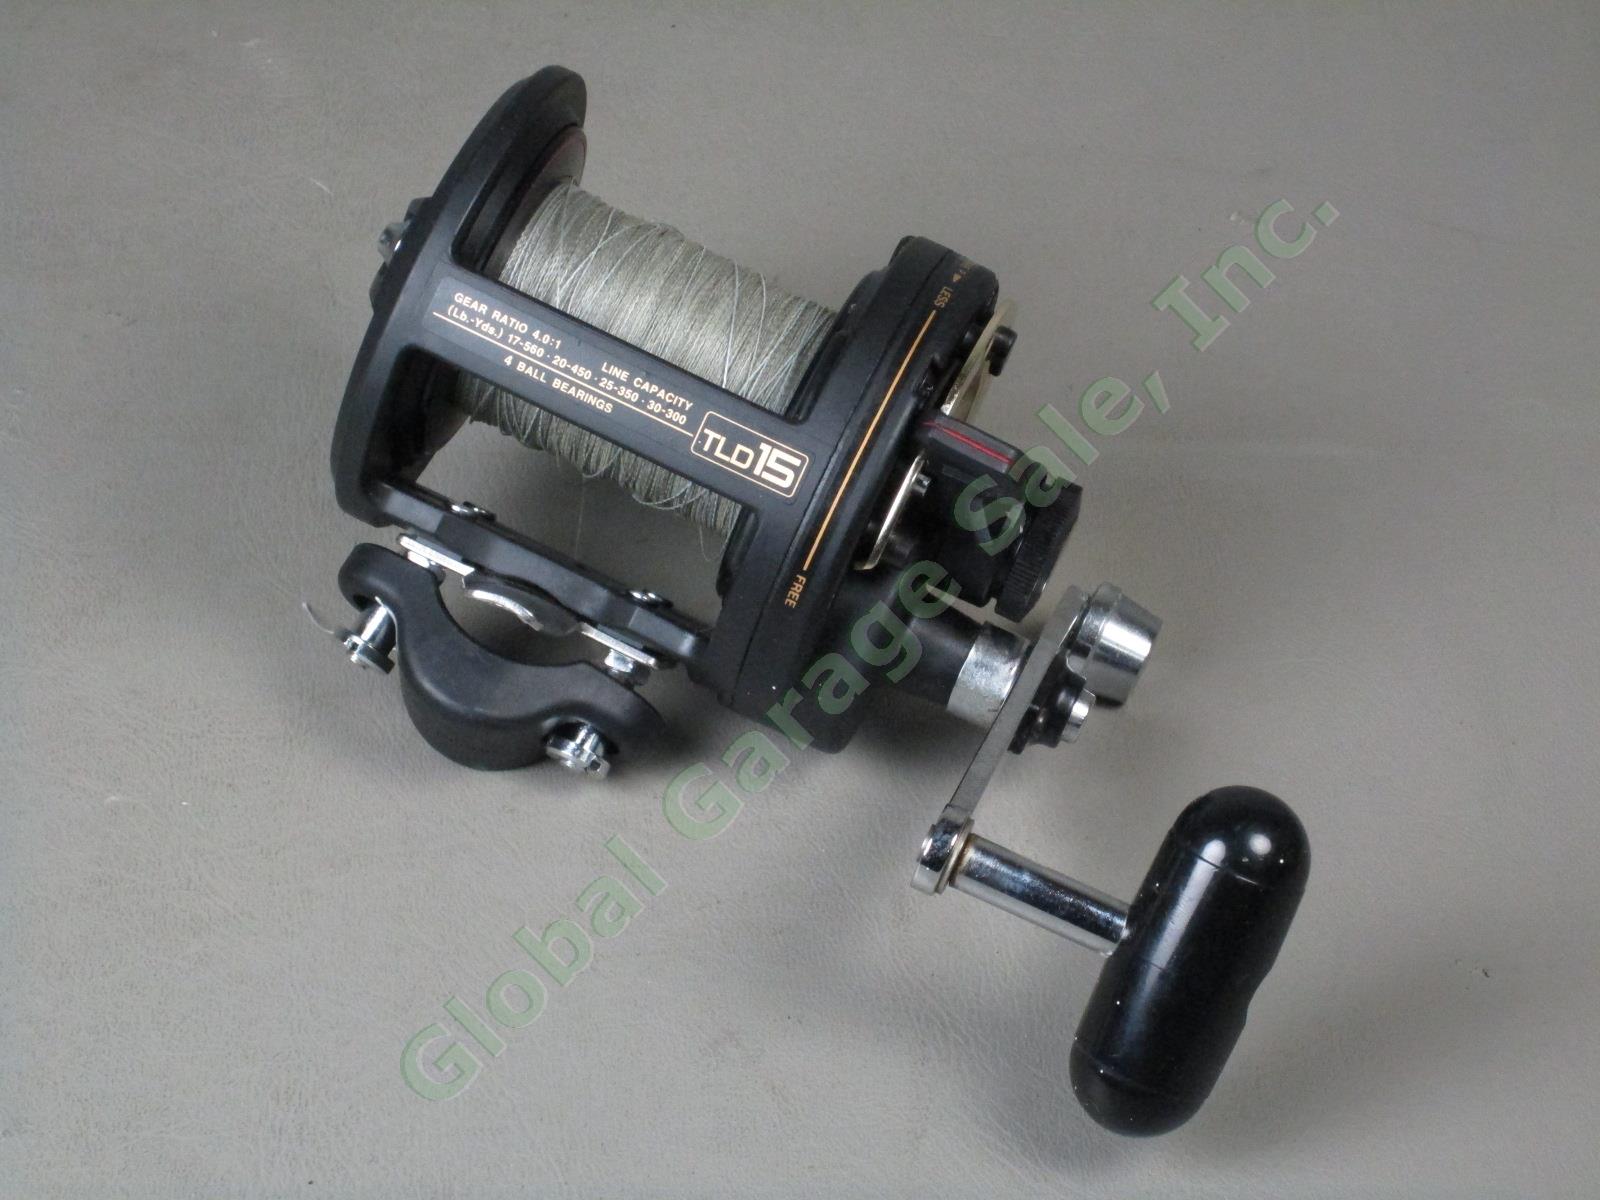 Shimano TLD15 Lever Drag Saltwater Fishing Reel One Piece Graphite Exc+ Cond NR!